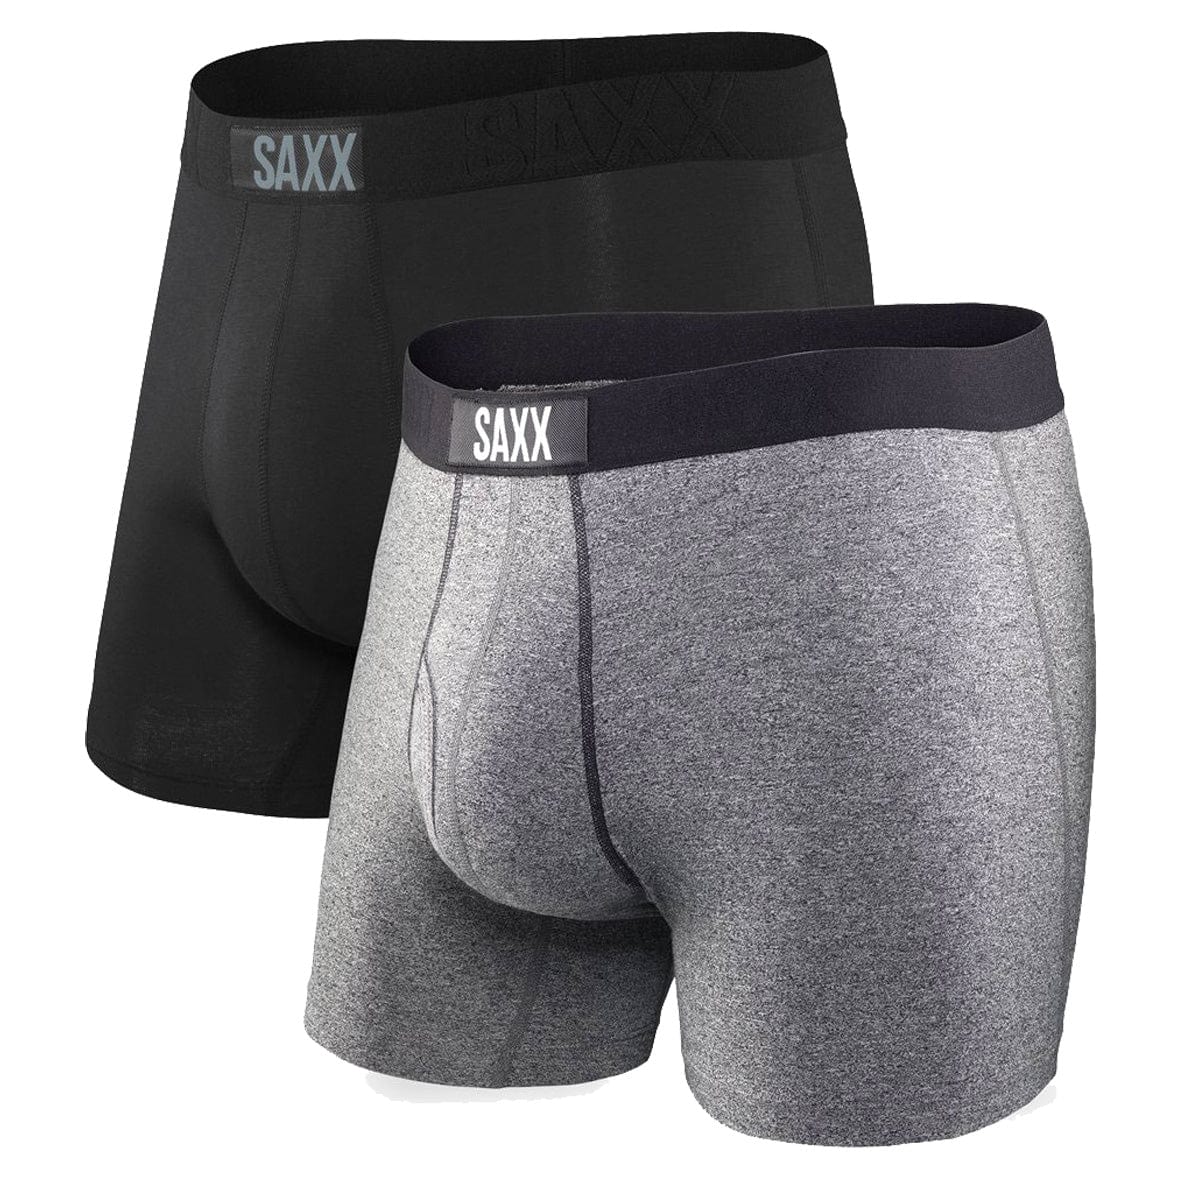 Saxx Vibe Boxers - Black / Grey (2 Pack) - The Hockey Shop Source For Sports